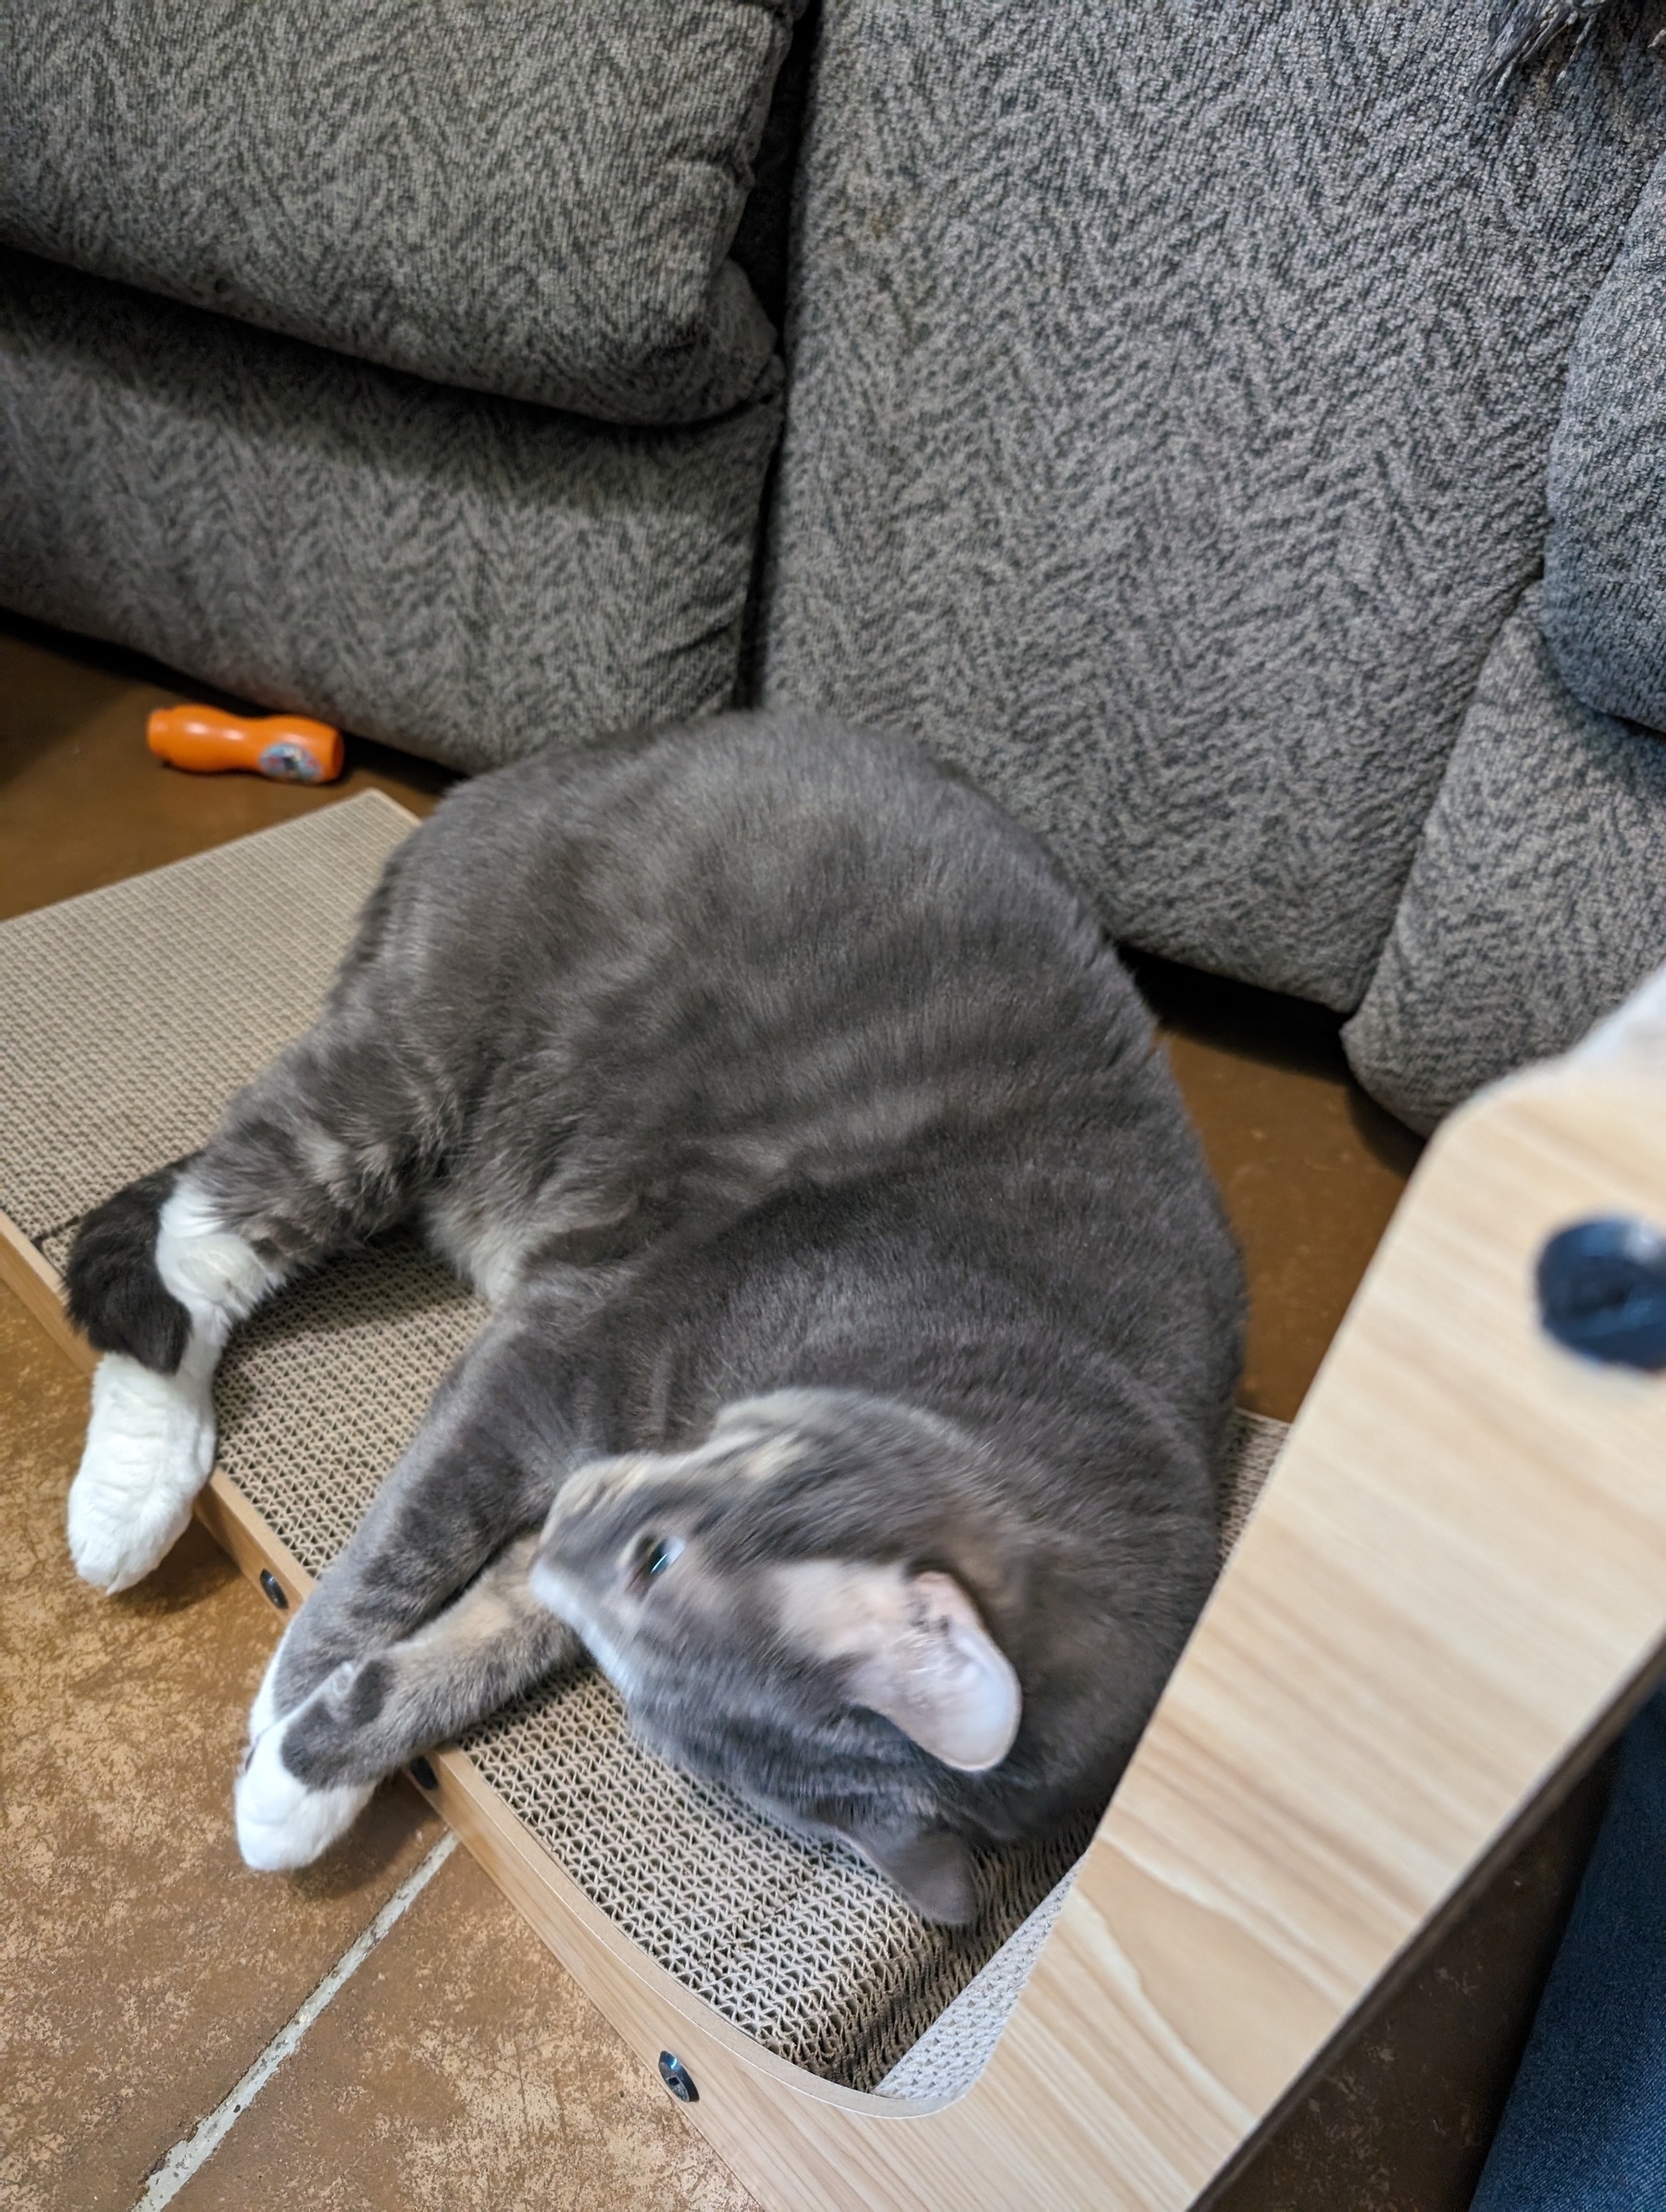 A photo of my grey and white feline lounging on his new scratching area.